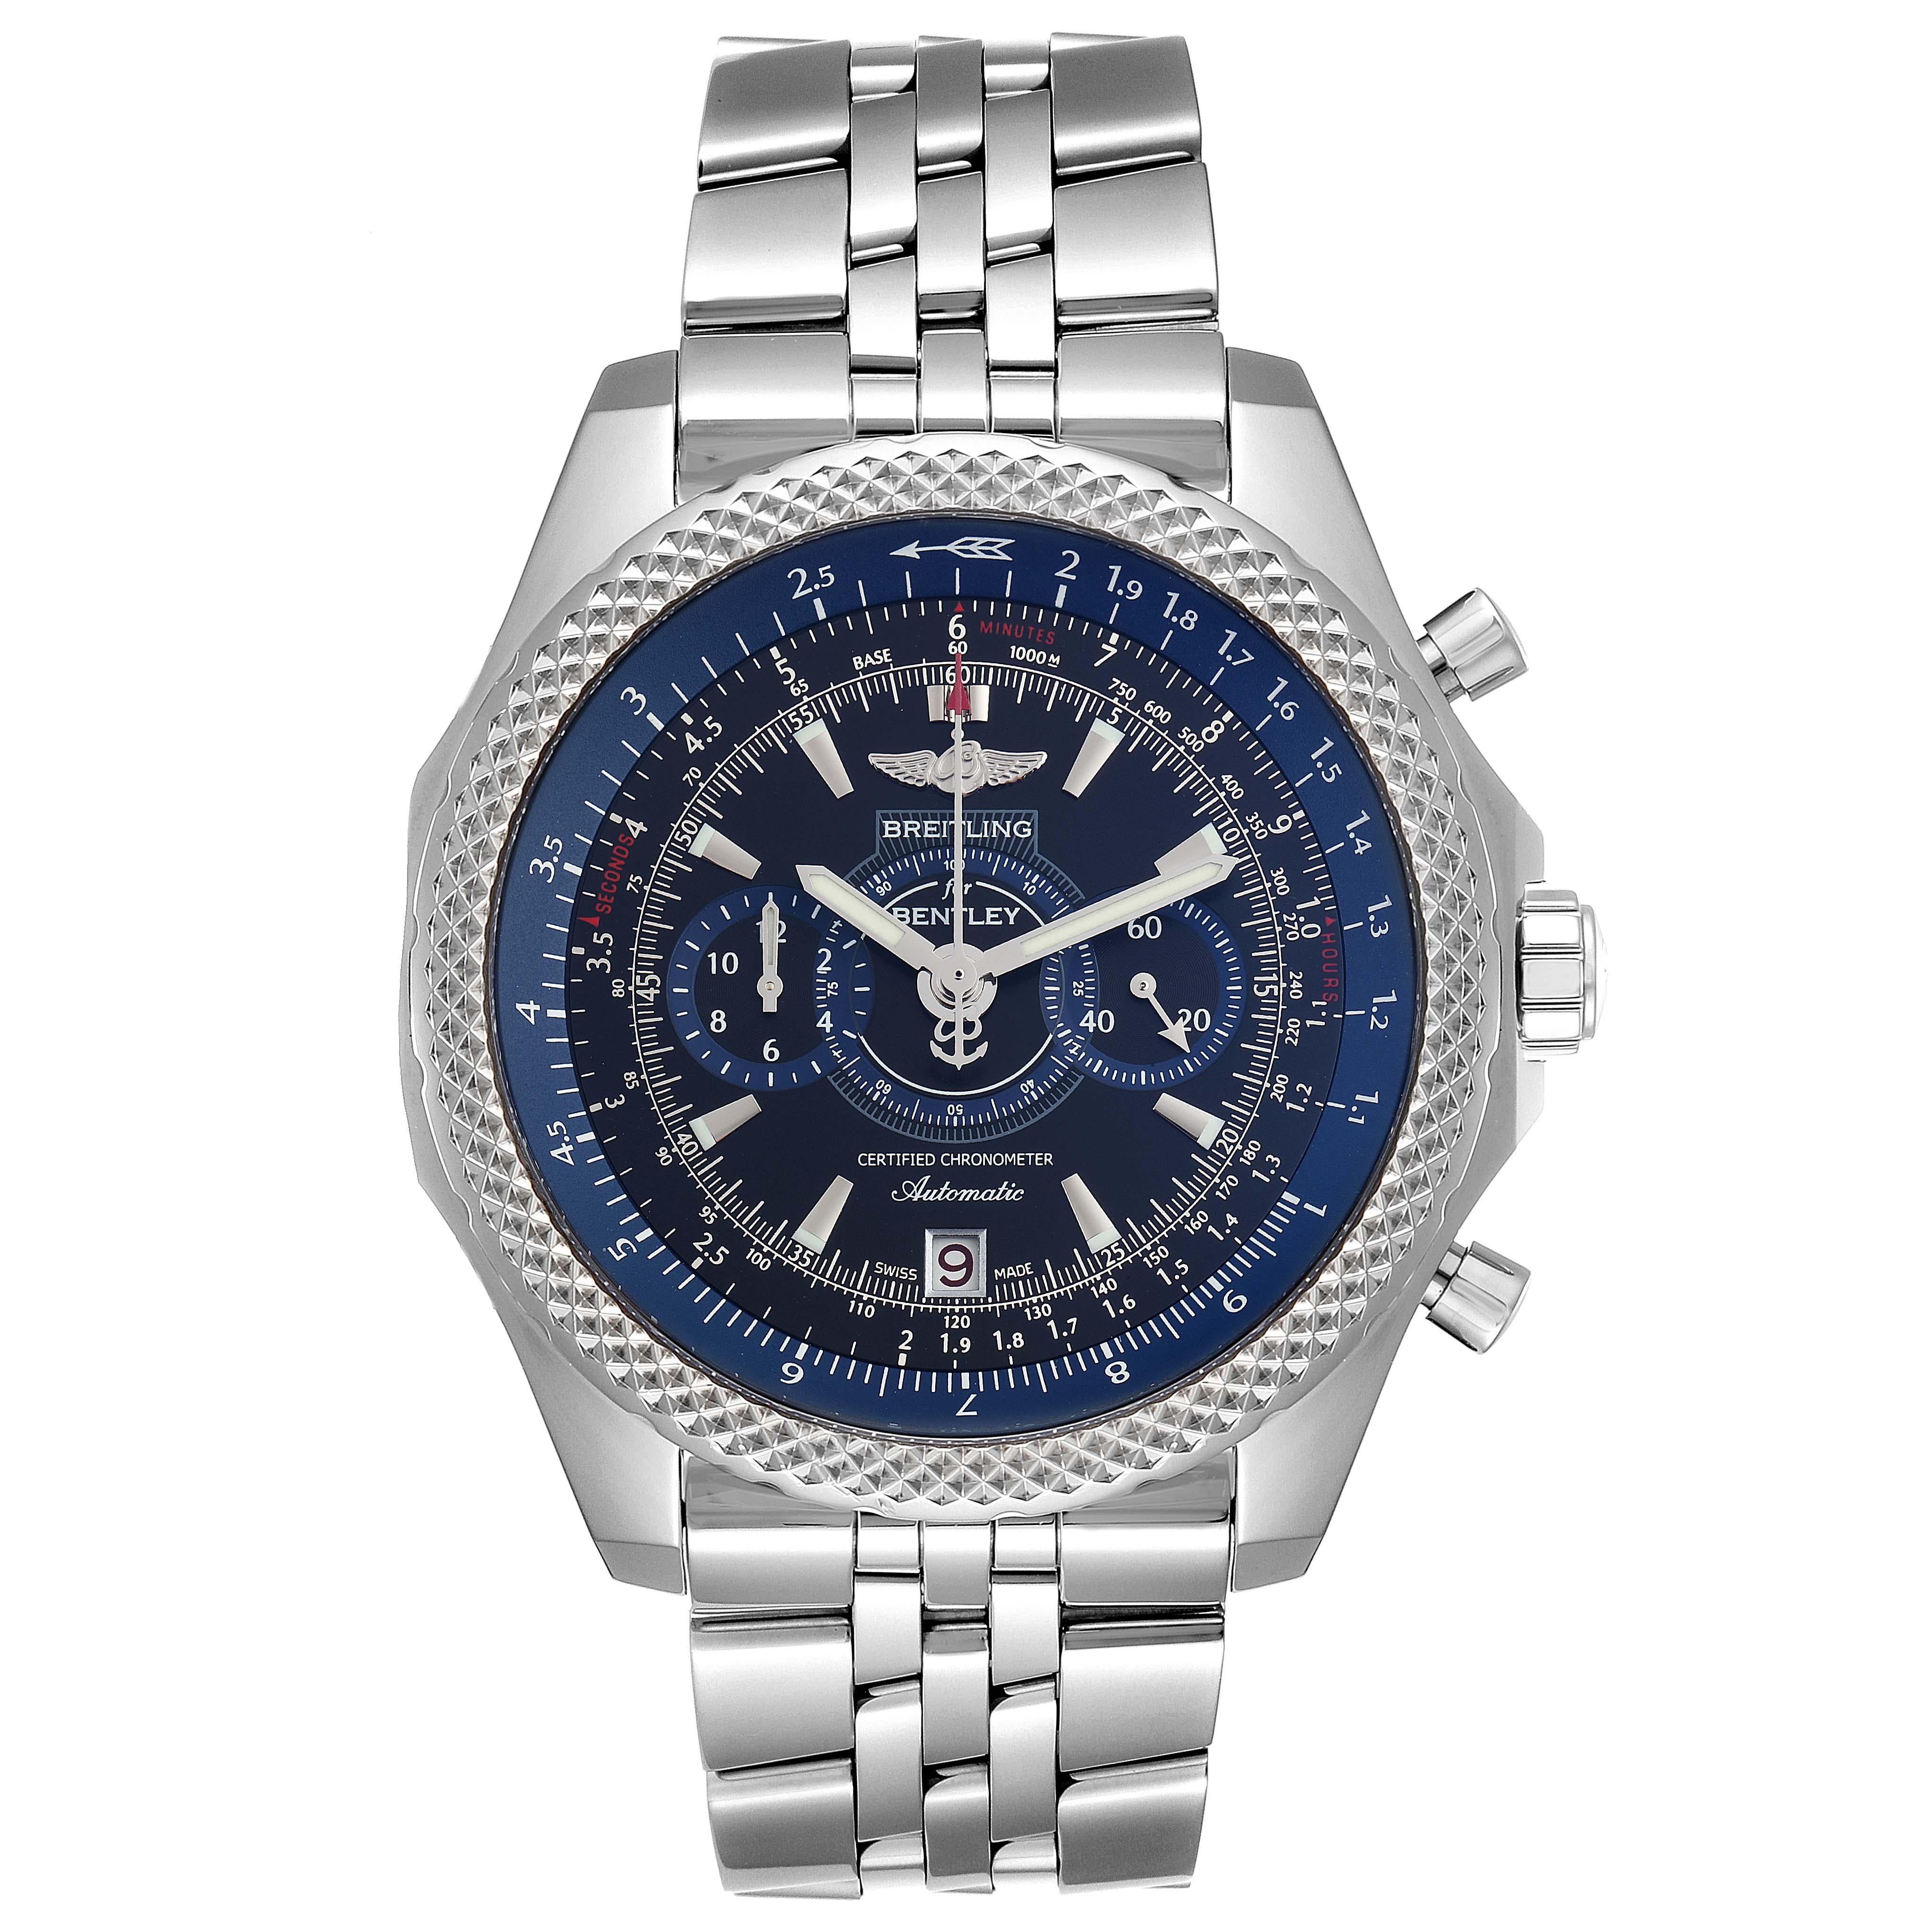 Breitling Bentley Supersports Limited Edition Watch A26364 Box Papers. Self-winding automatic officially certified chronometer movement. Chronograph function. Stainless steel case 48.7 mm in diameter. Stainless steel screwed-down crown and pushers.